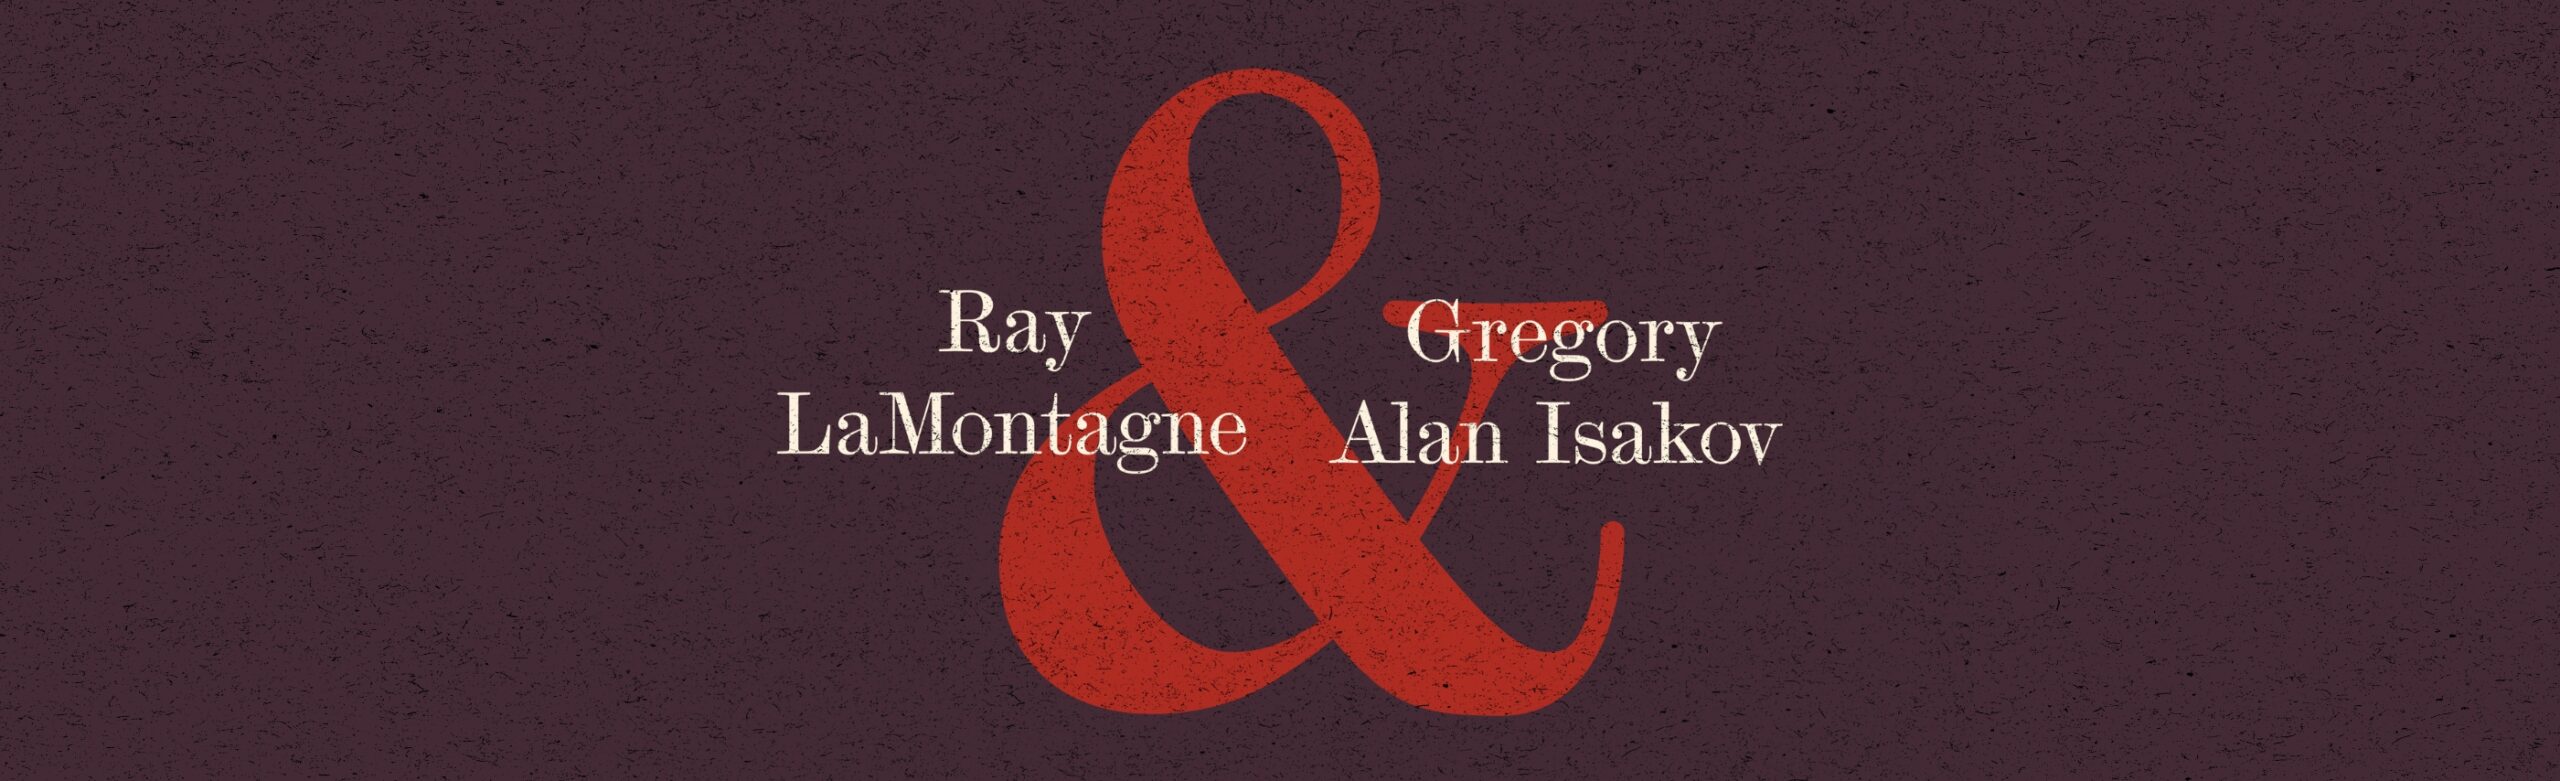 Ray LaMontagne and Gregory Alan Isakov to Co-headline KettleHouse Amphitheater with The Secret Sisters Image